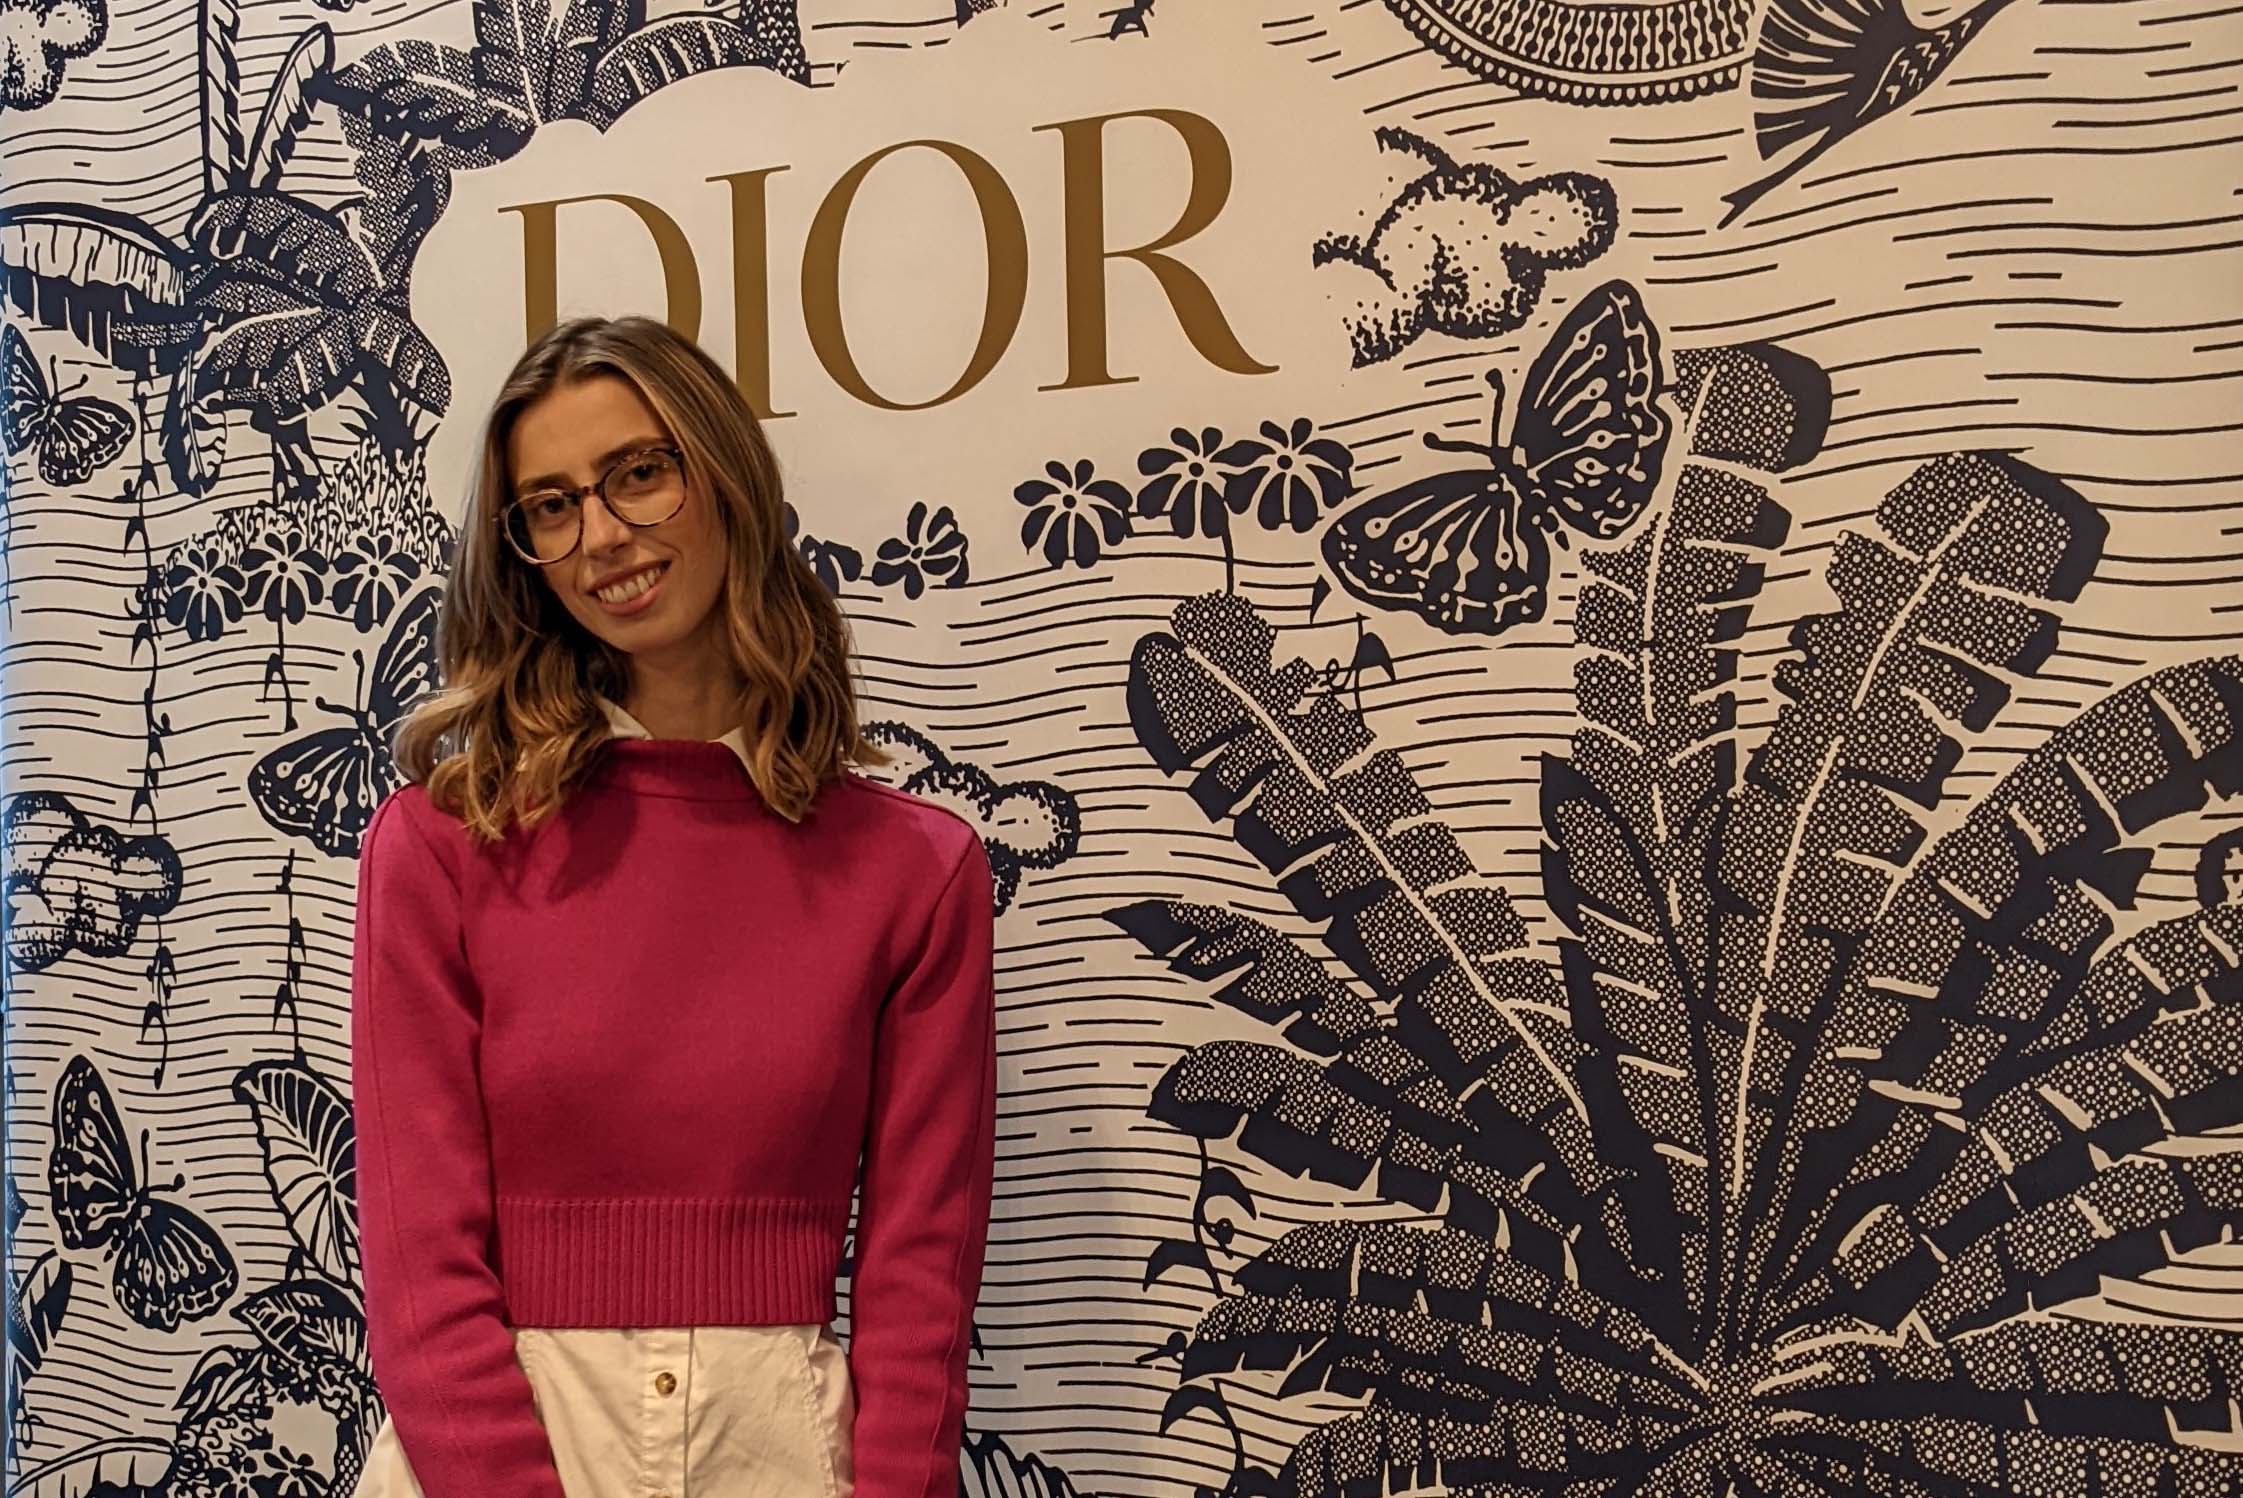 Photo of Ellie Barclay in front of Dior sign